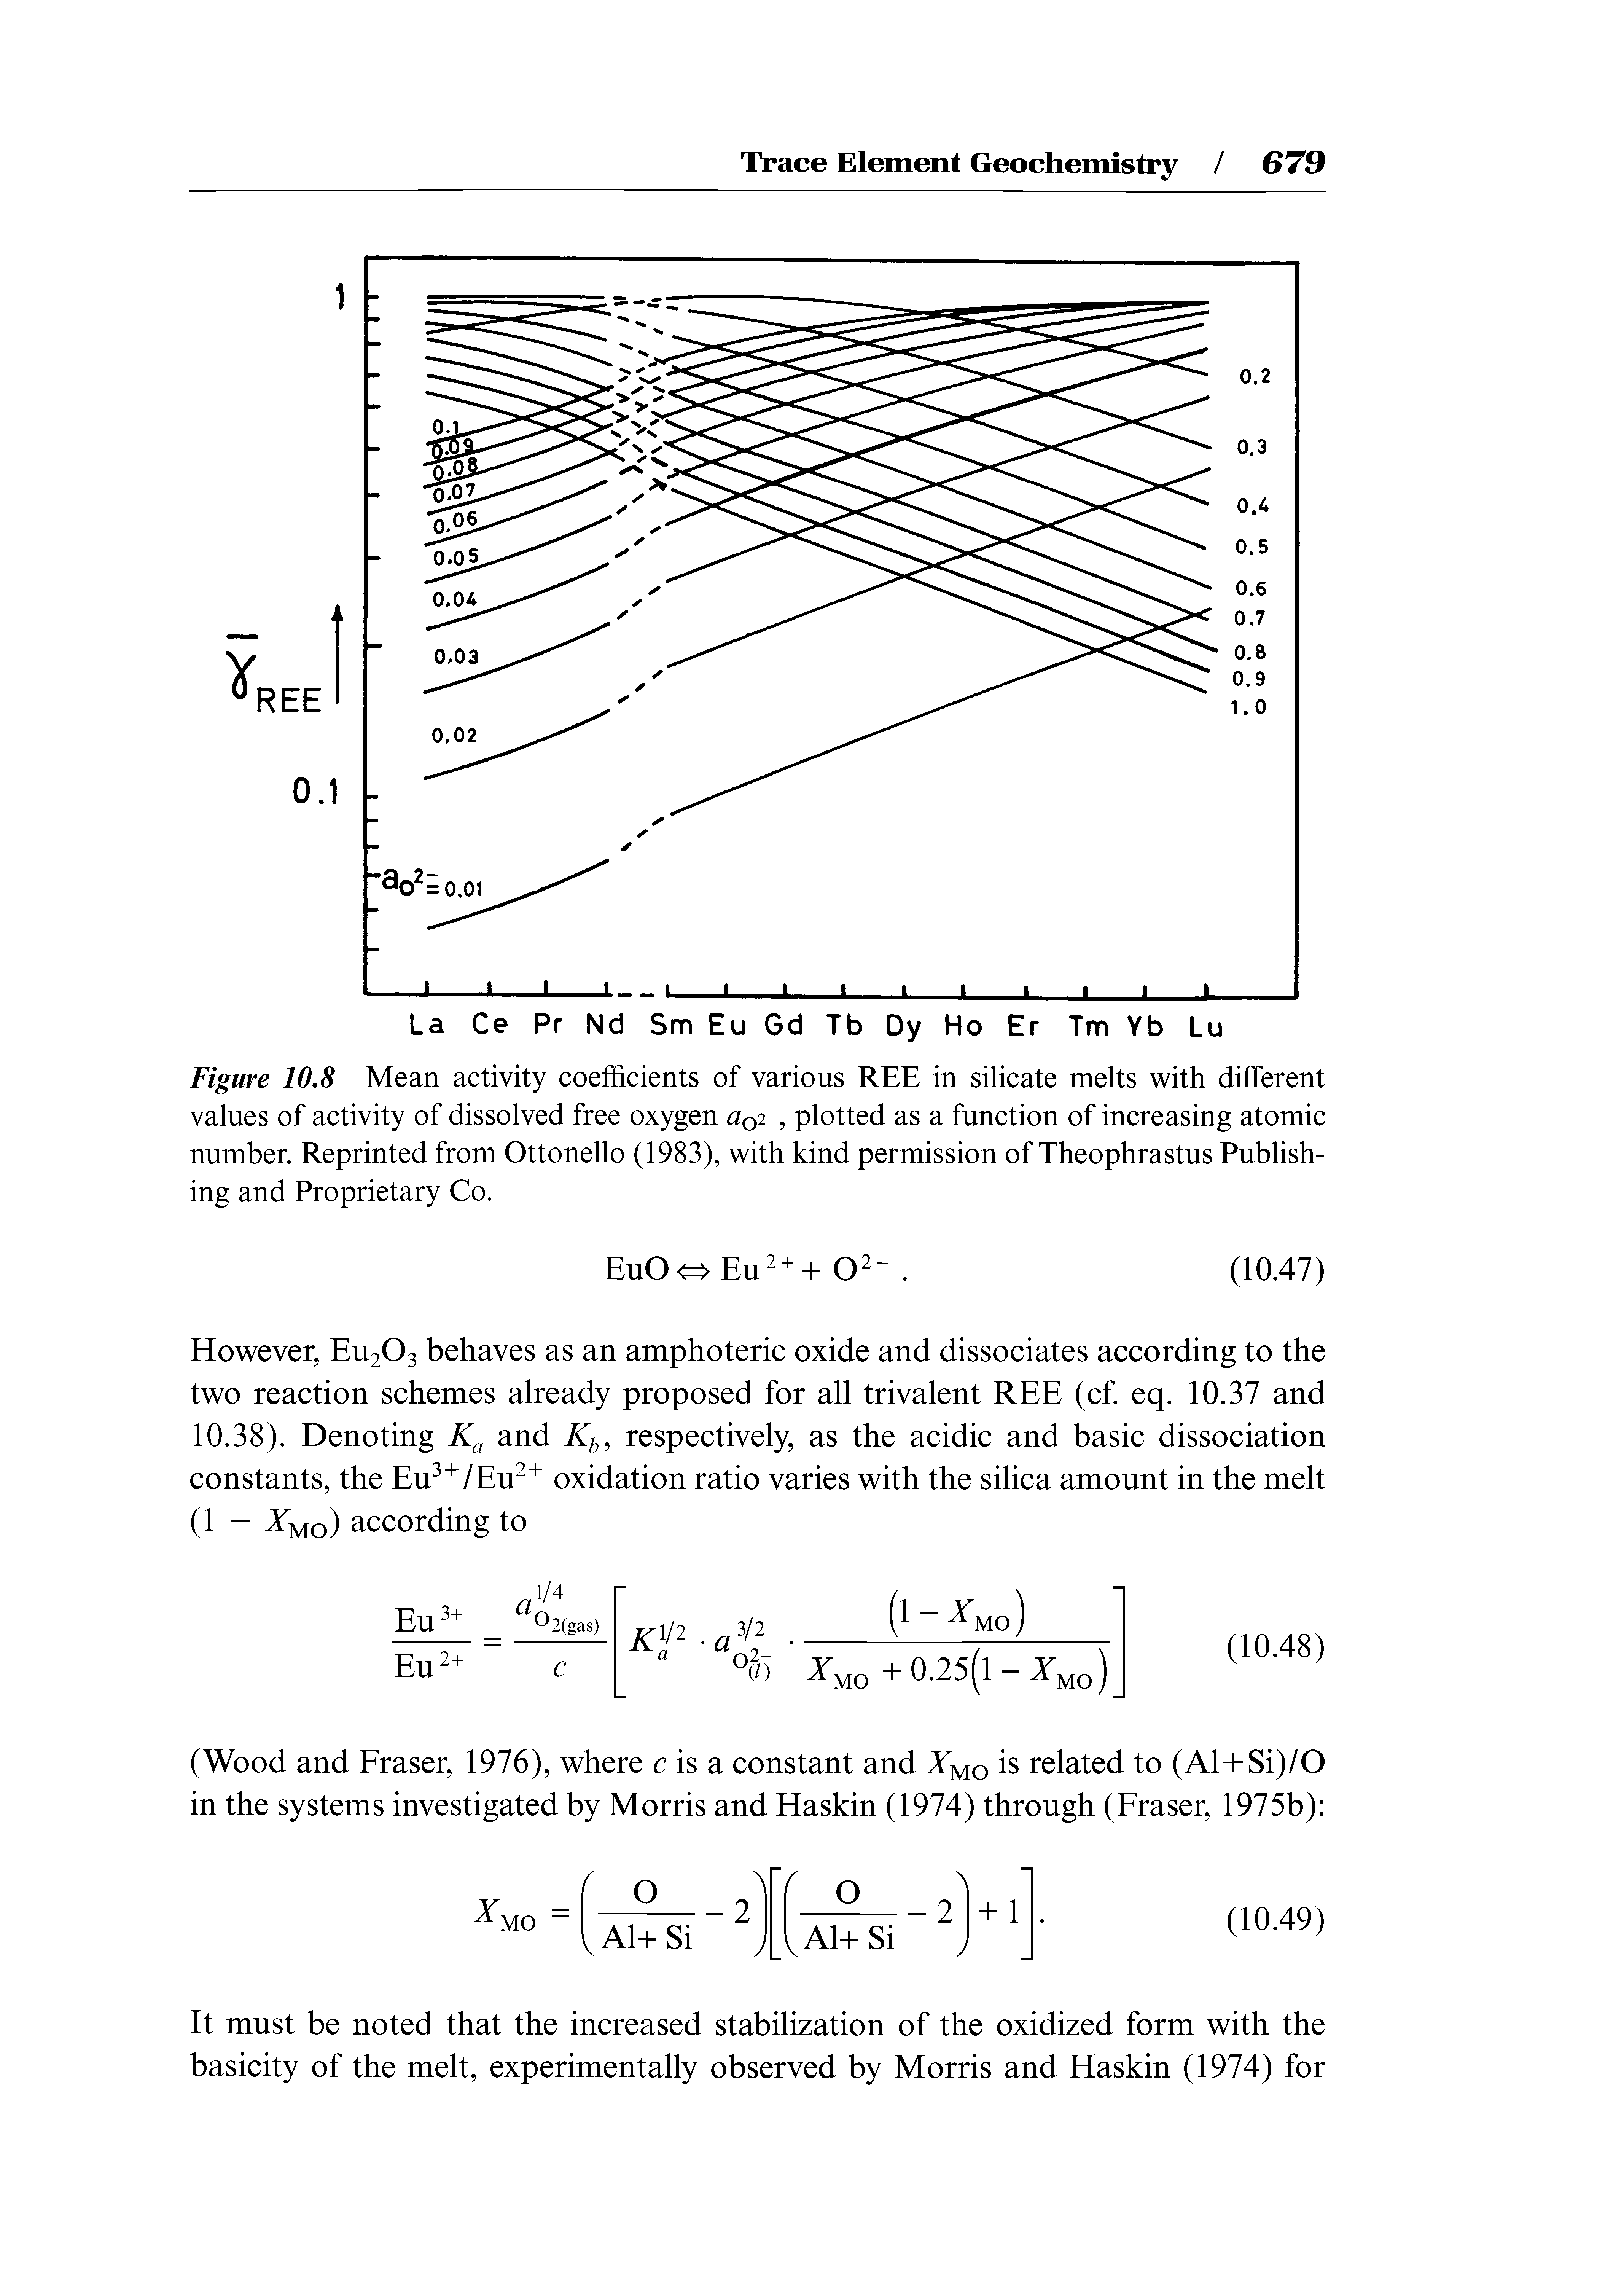 Figure 10,8 Mean activity coefficients of various REE in silicate melts with different values of activity of dissolved free oxygen Uq -, plotted as a function of increasing atomic number. Reprinted from Ottonello (1983), with kind permission of Theophrastus Publishing and Proprietary Co.